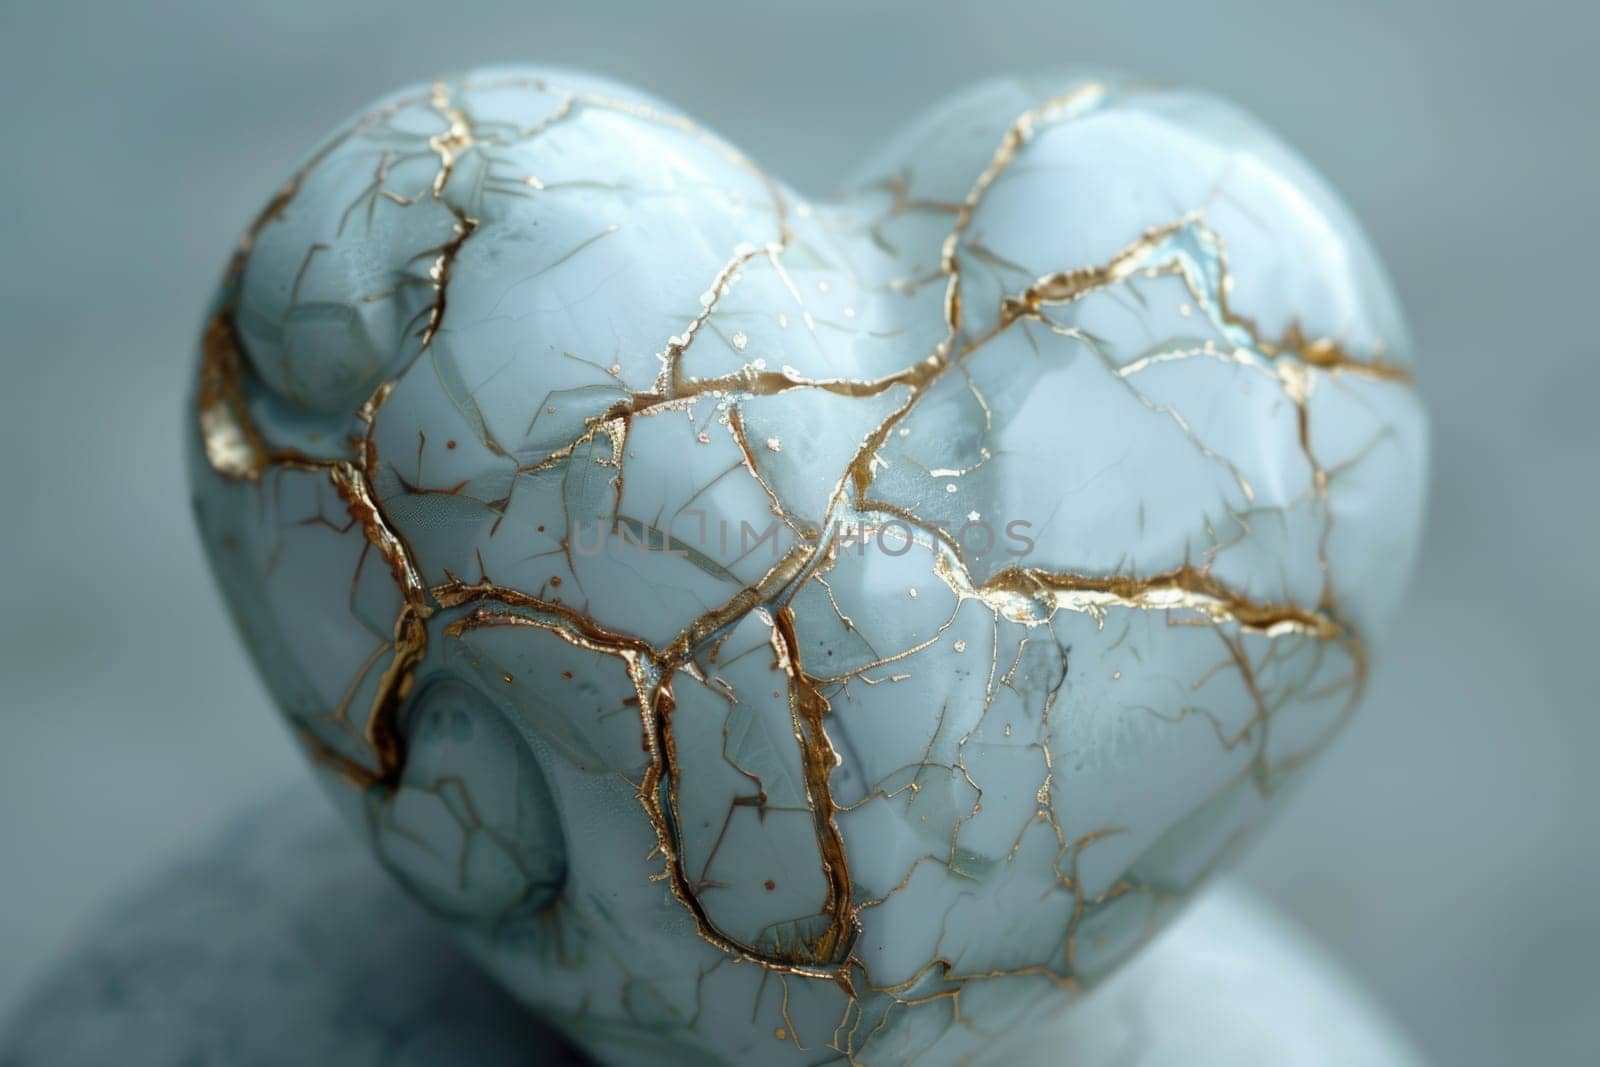 A detailed close-up of a heart-shaped object resting on a table, showcasing its intricate design and texture.